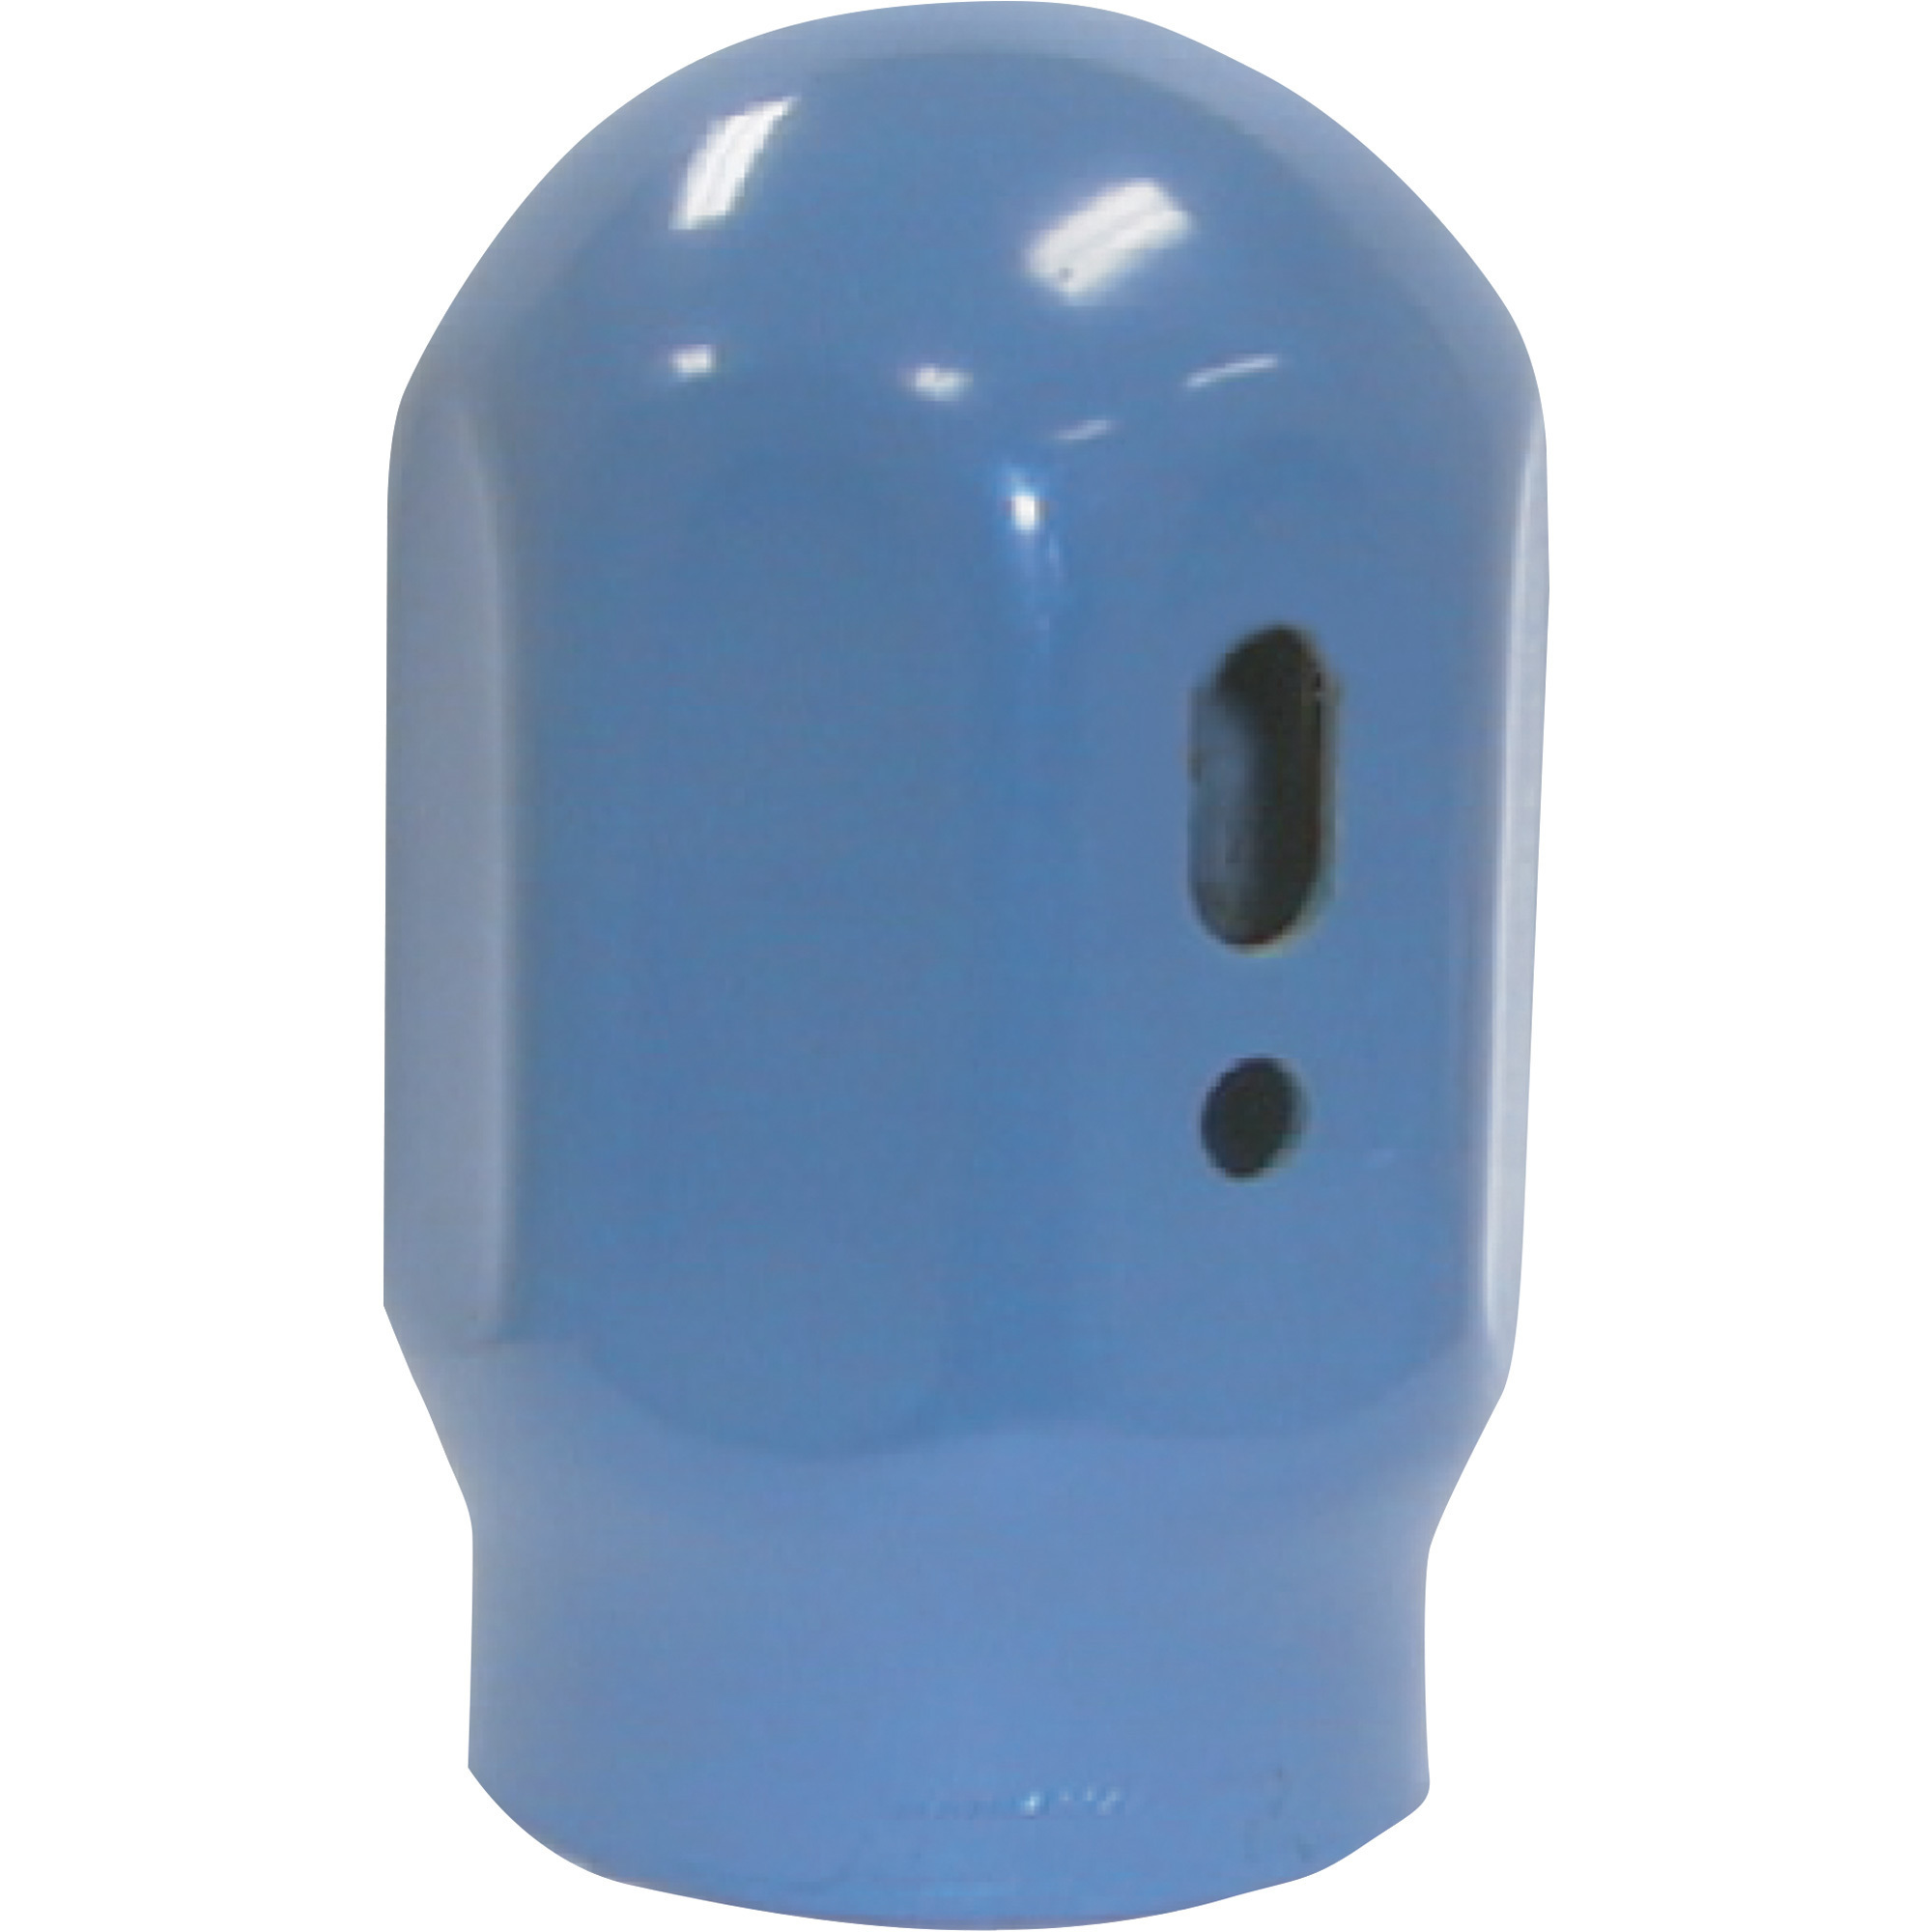 Thoroughbred Replacement Cylinder Cap â Fits Select Argon, Argon/CO2, Helium, Nitrogen and Oxygen Cylinders, Model TBCH-40